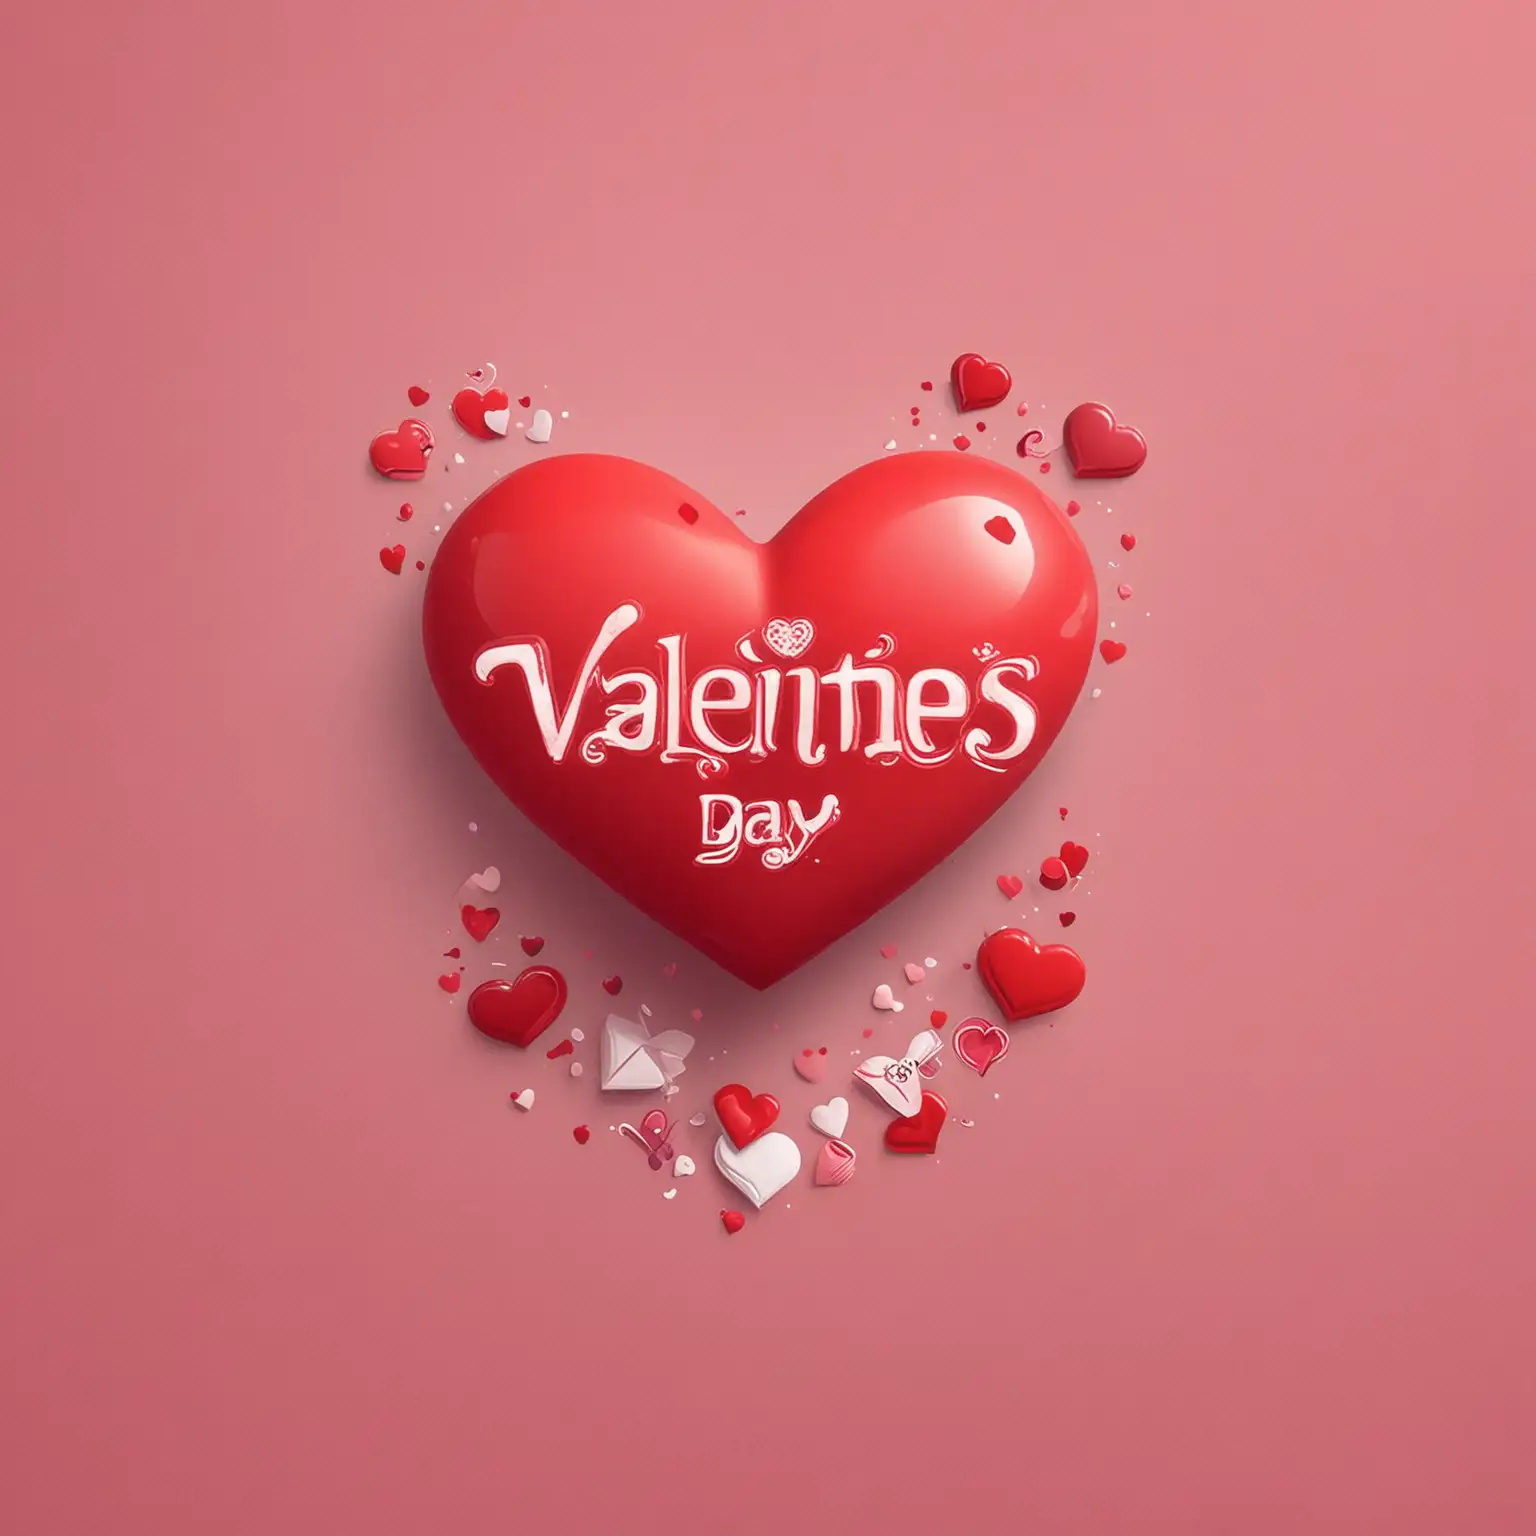 Animated Valentines Day Logo with Heartshaped Balloons and Confetti